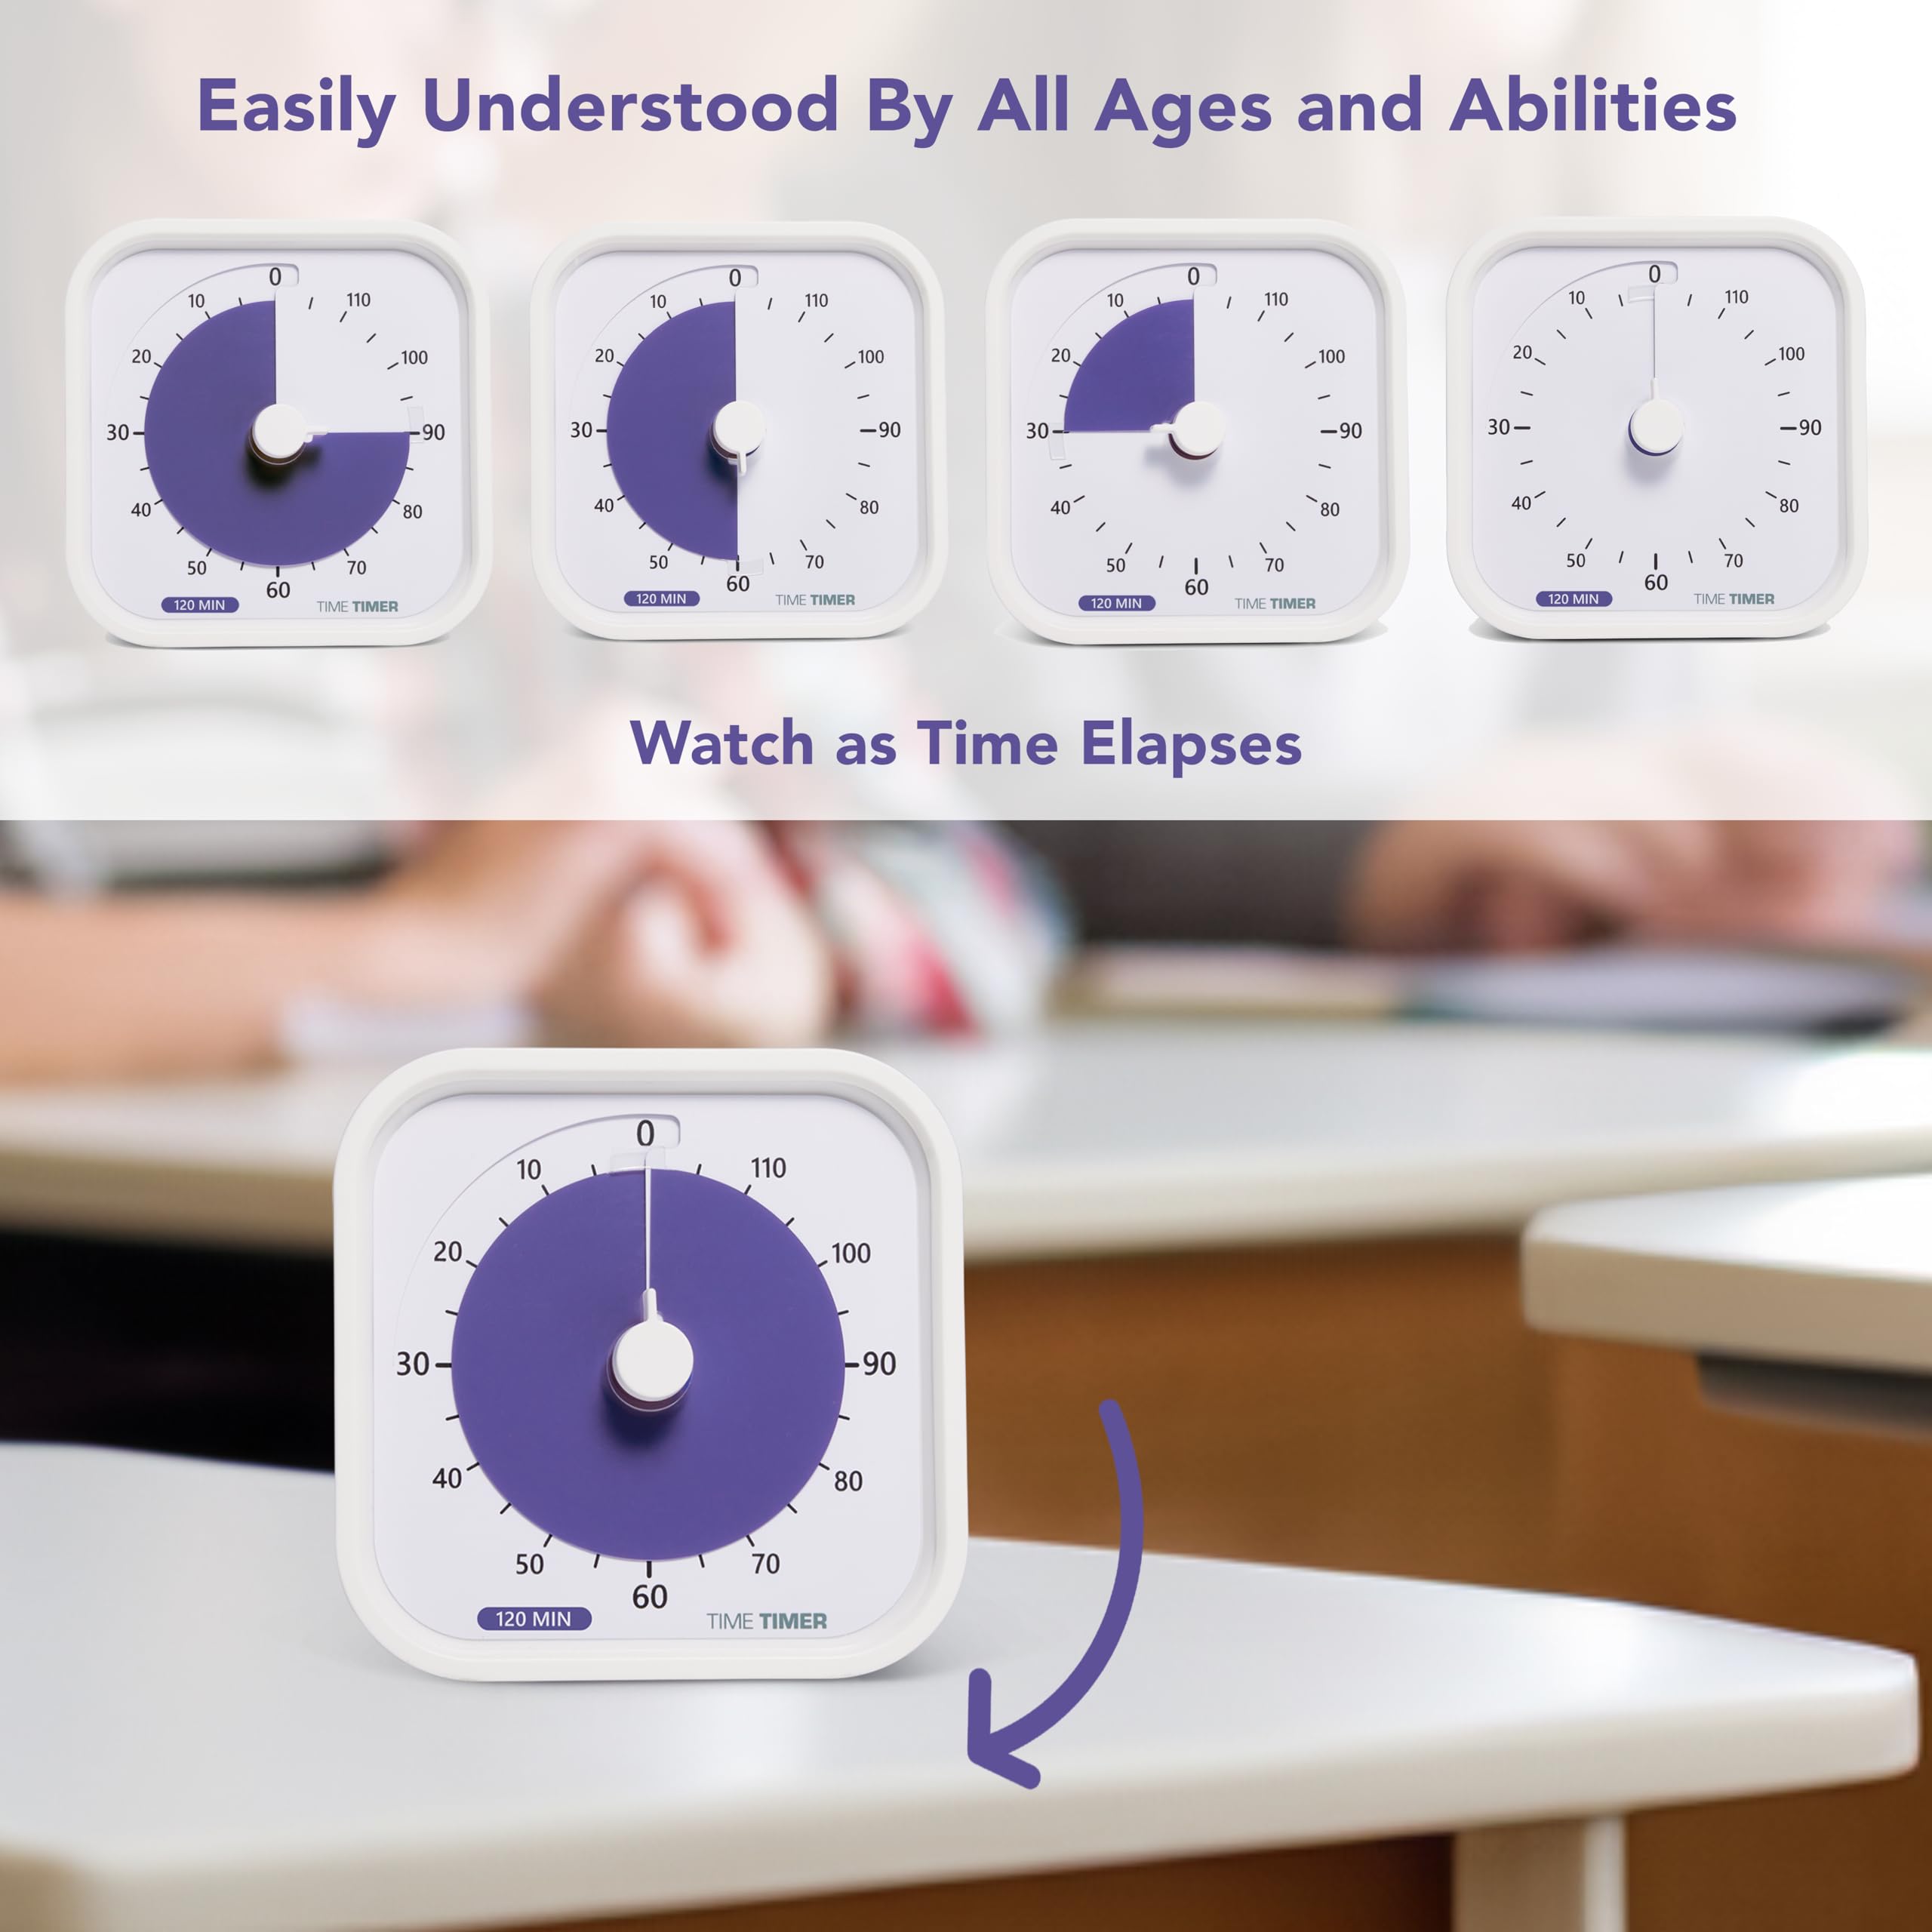 TIME TIMER 120 Minute MOD Education Edition ⁠— Visual Timer with Desktop Software for Kids Classroom Learning, Testing Timer, Study Tool and Office Meetings with Silent Operation (White - 120min)